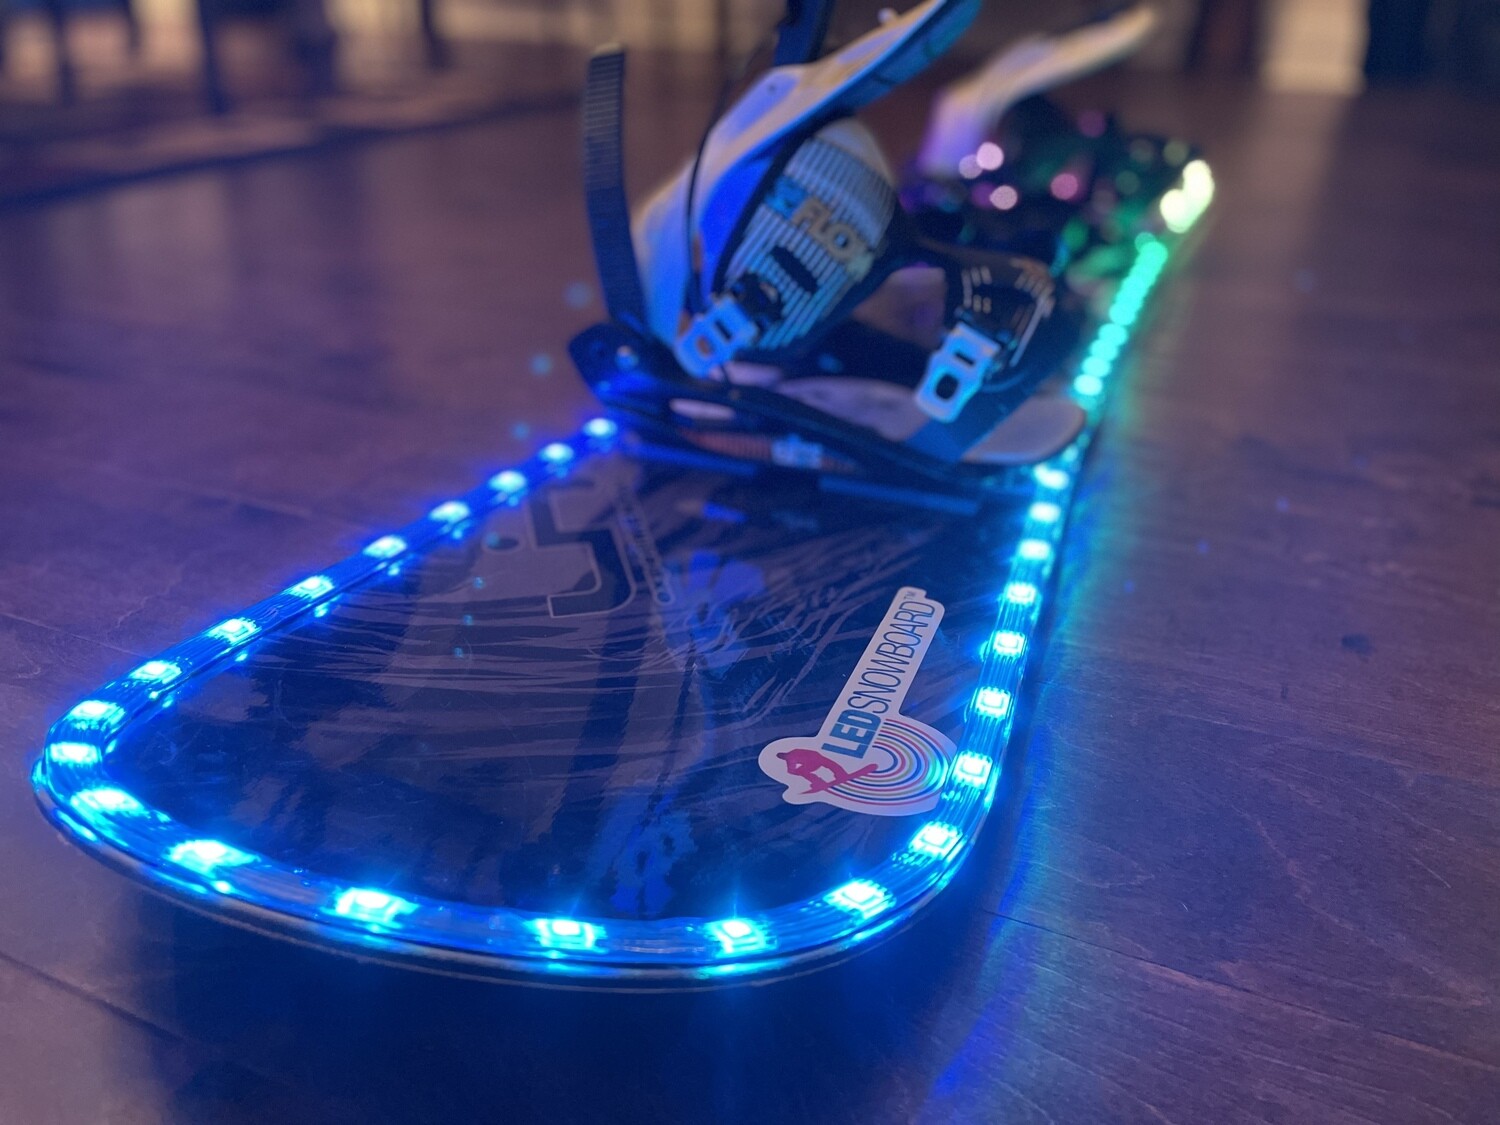 NEW) LED Snowboard Kit with 360 degree LED strips